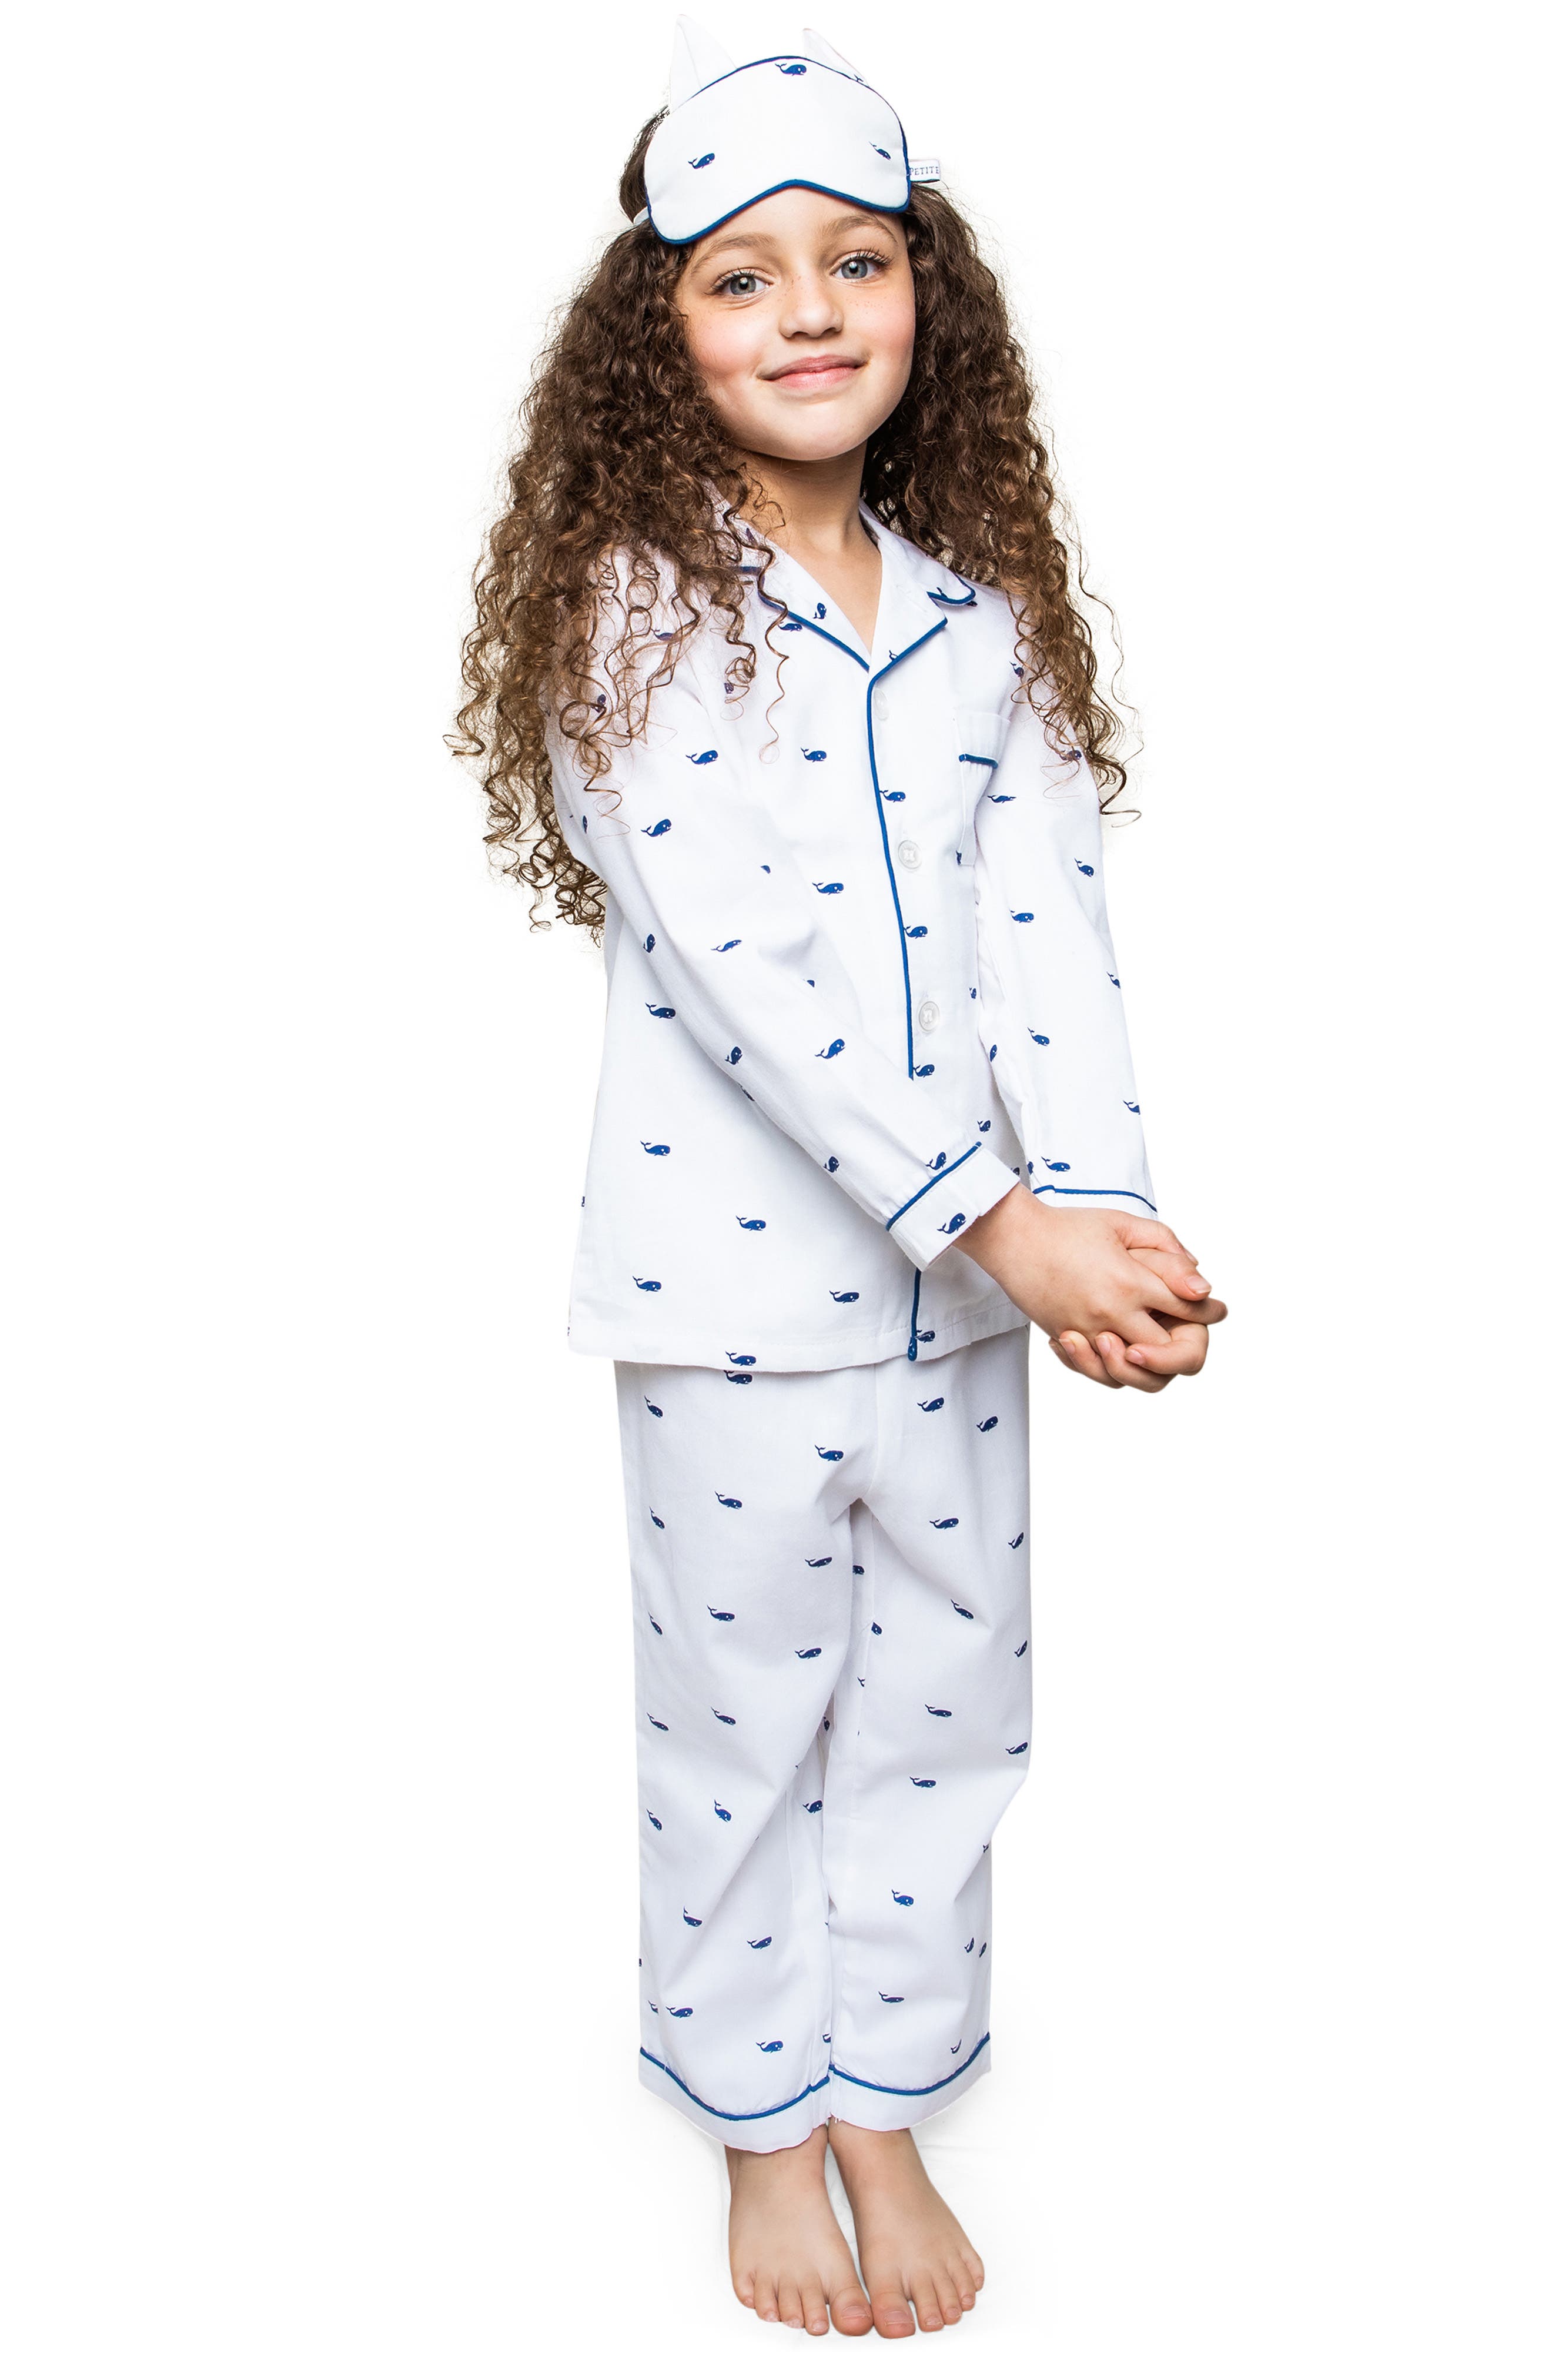 Nordstrom Clothing Loungewear Nightdresses & Shirts Kids Two-Piece Pajamas in White at Nordstrom 